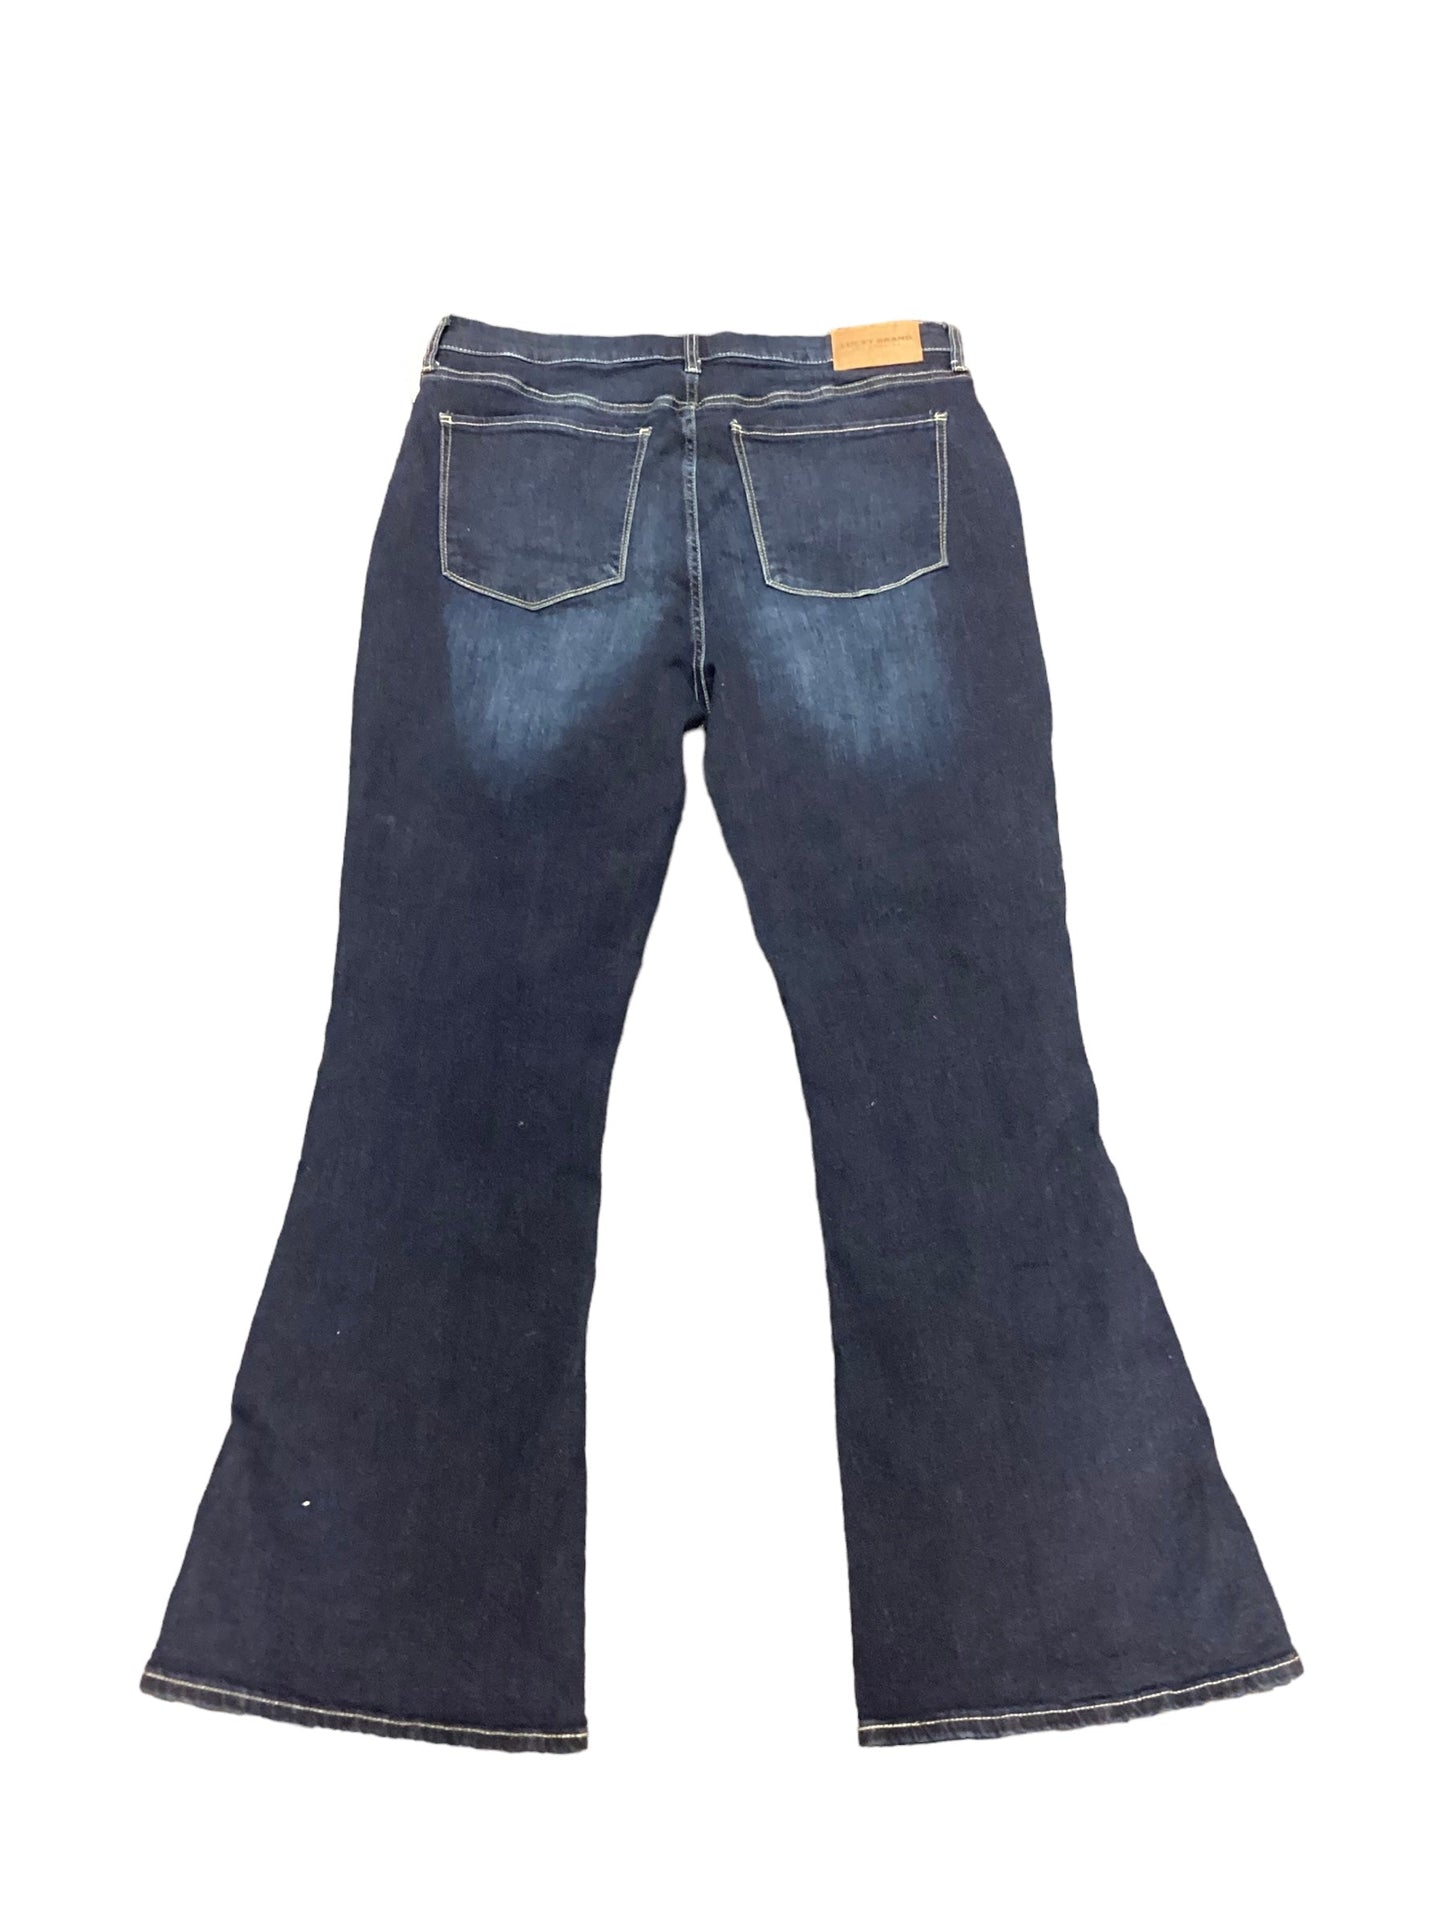 Blue Denim Jeans Flared Lucky Brand, Size 16